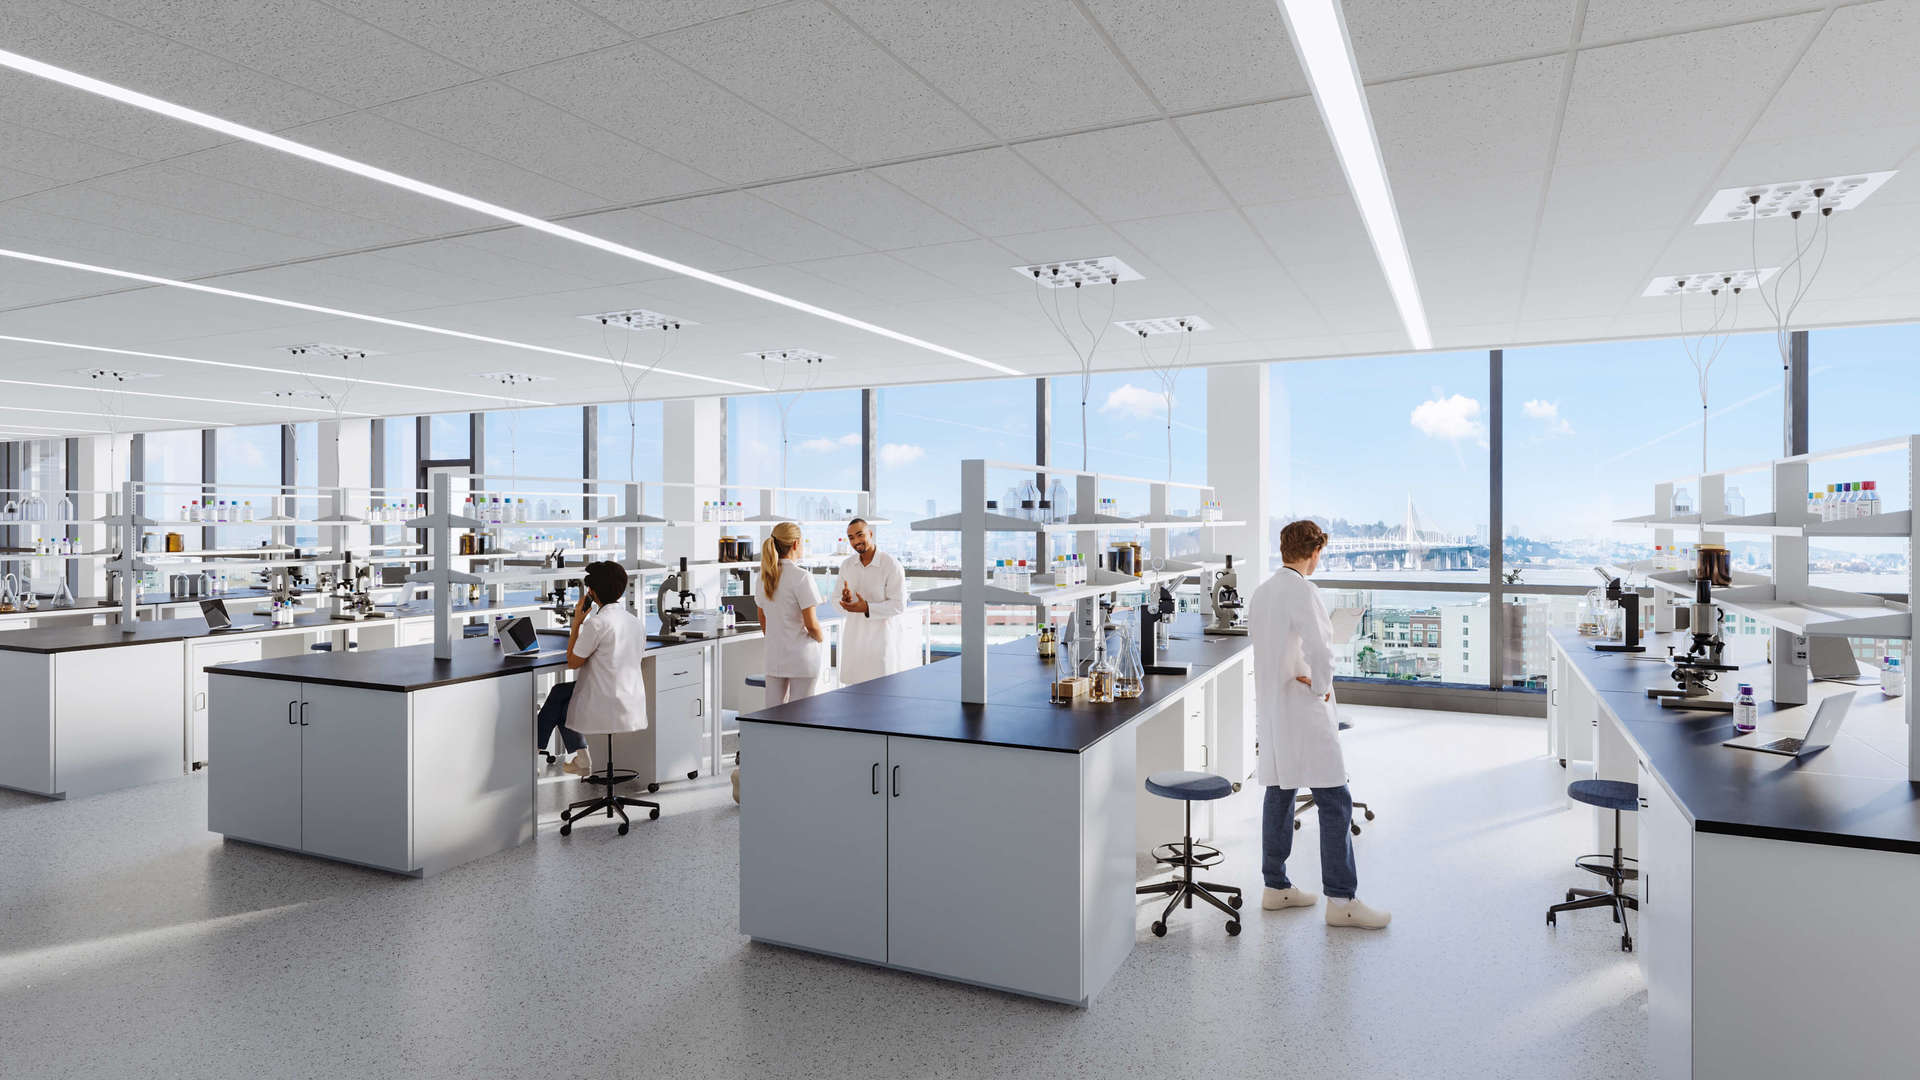 Innovate in modern lab space